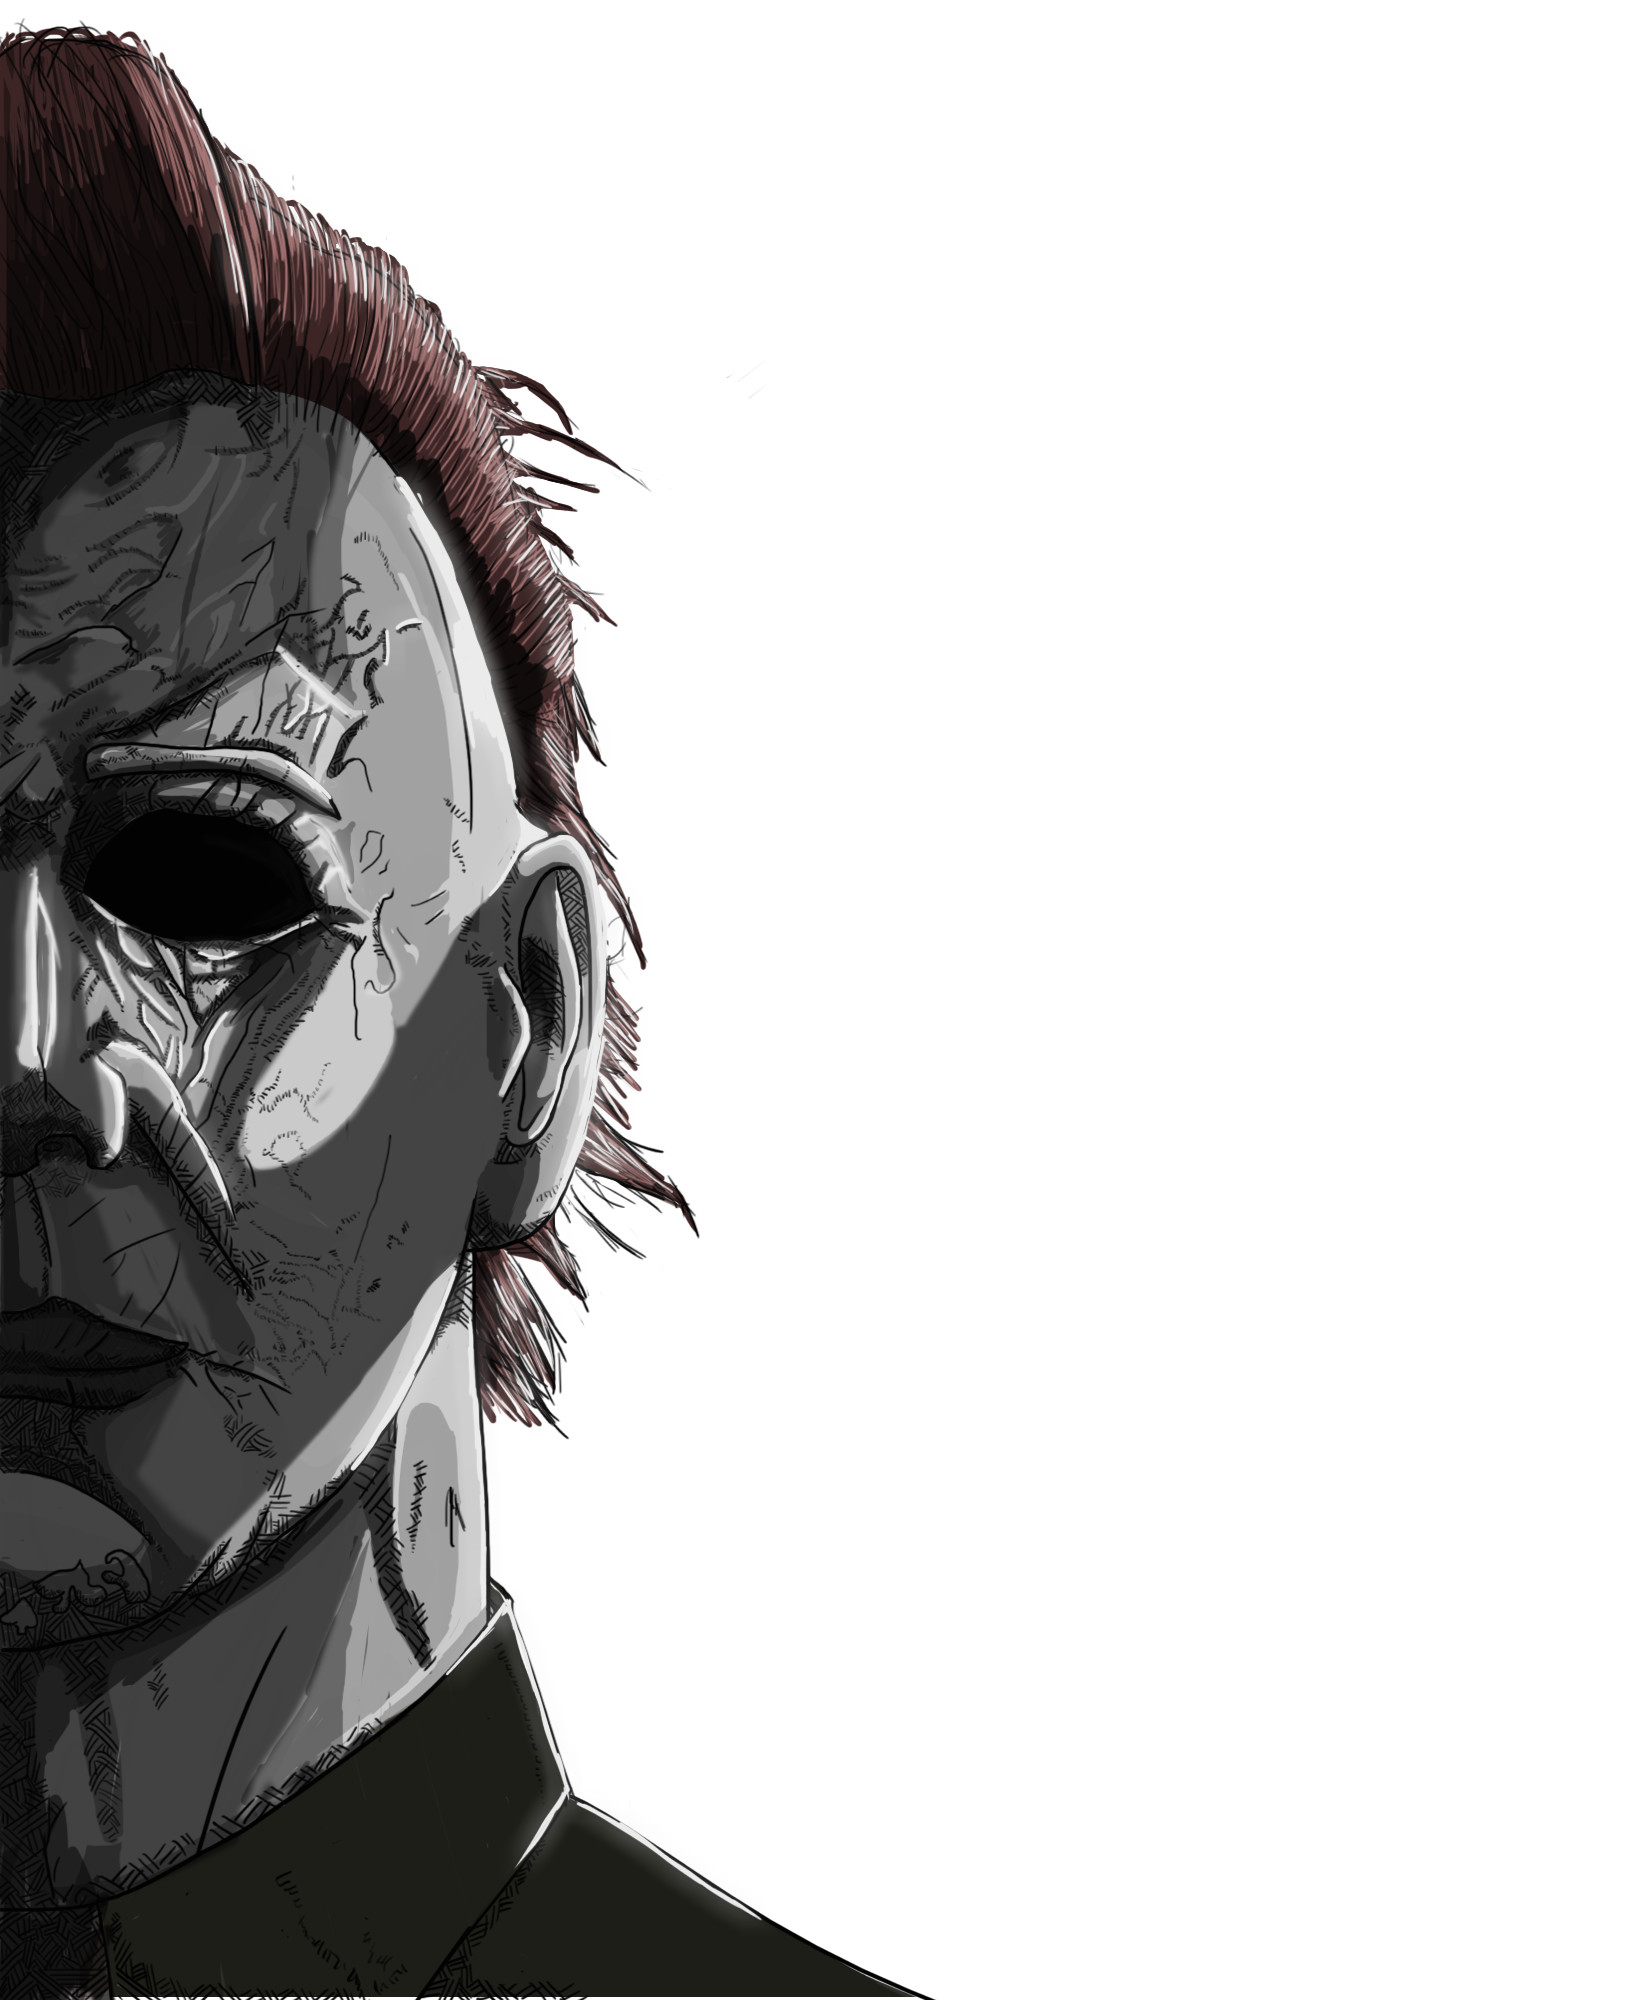 The Faces of Michael Myers by SabiCat13 on DeviantArt